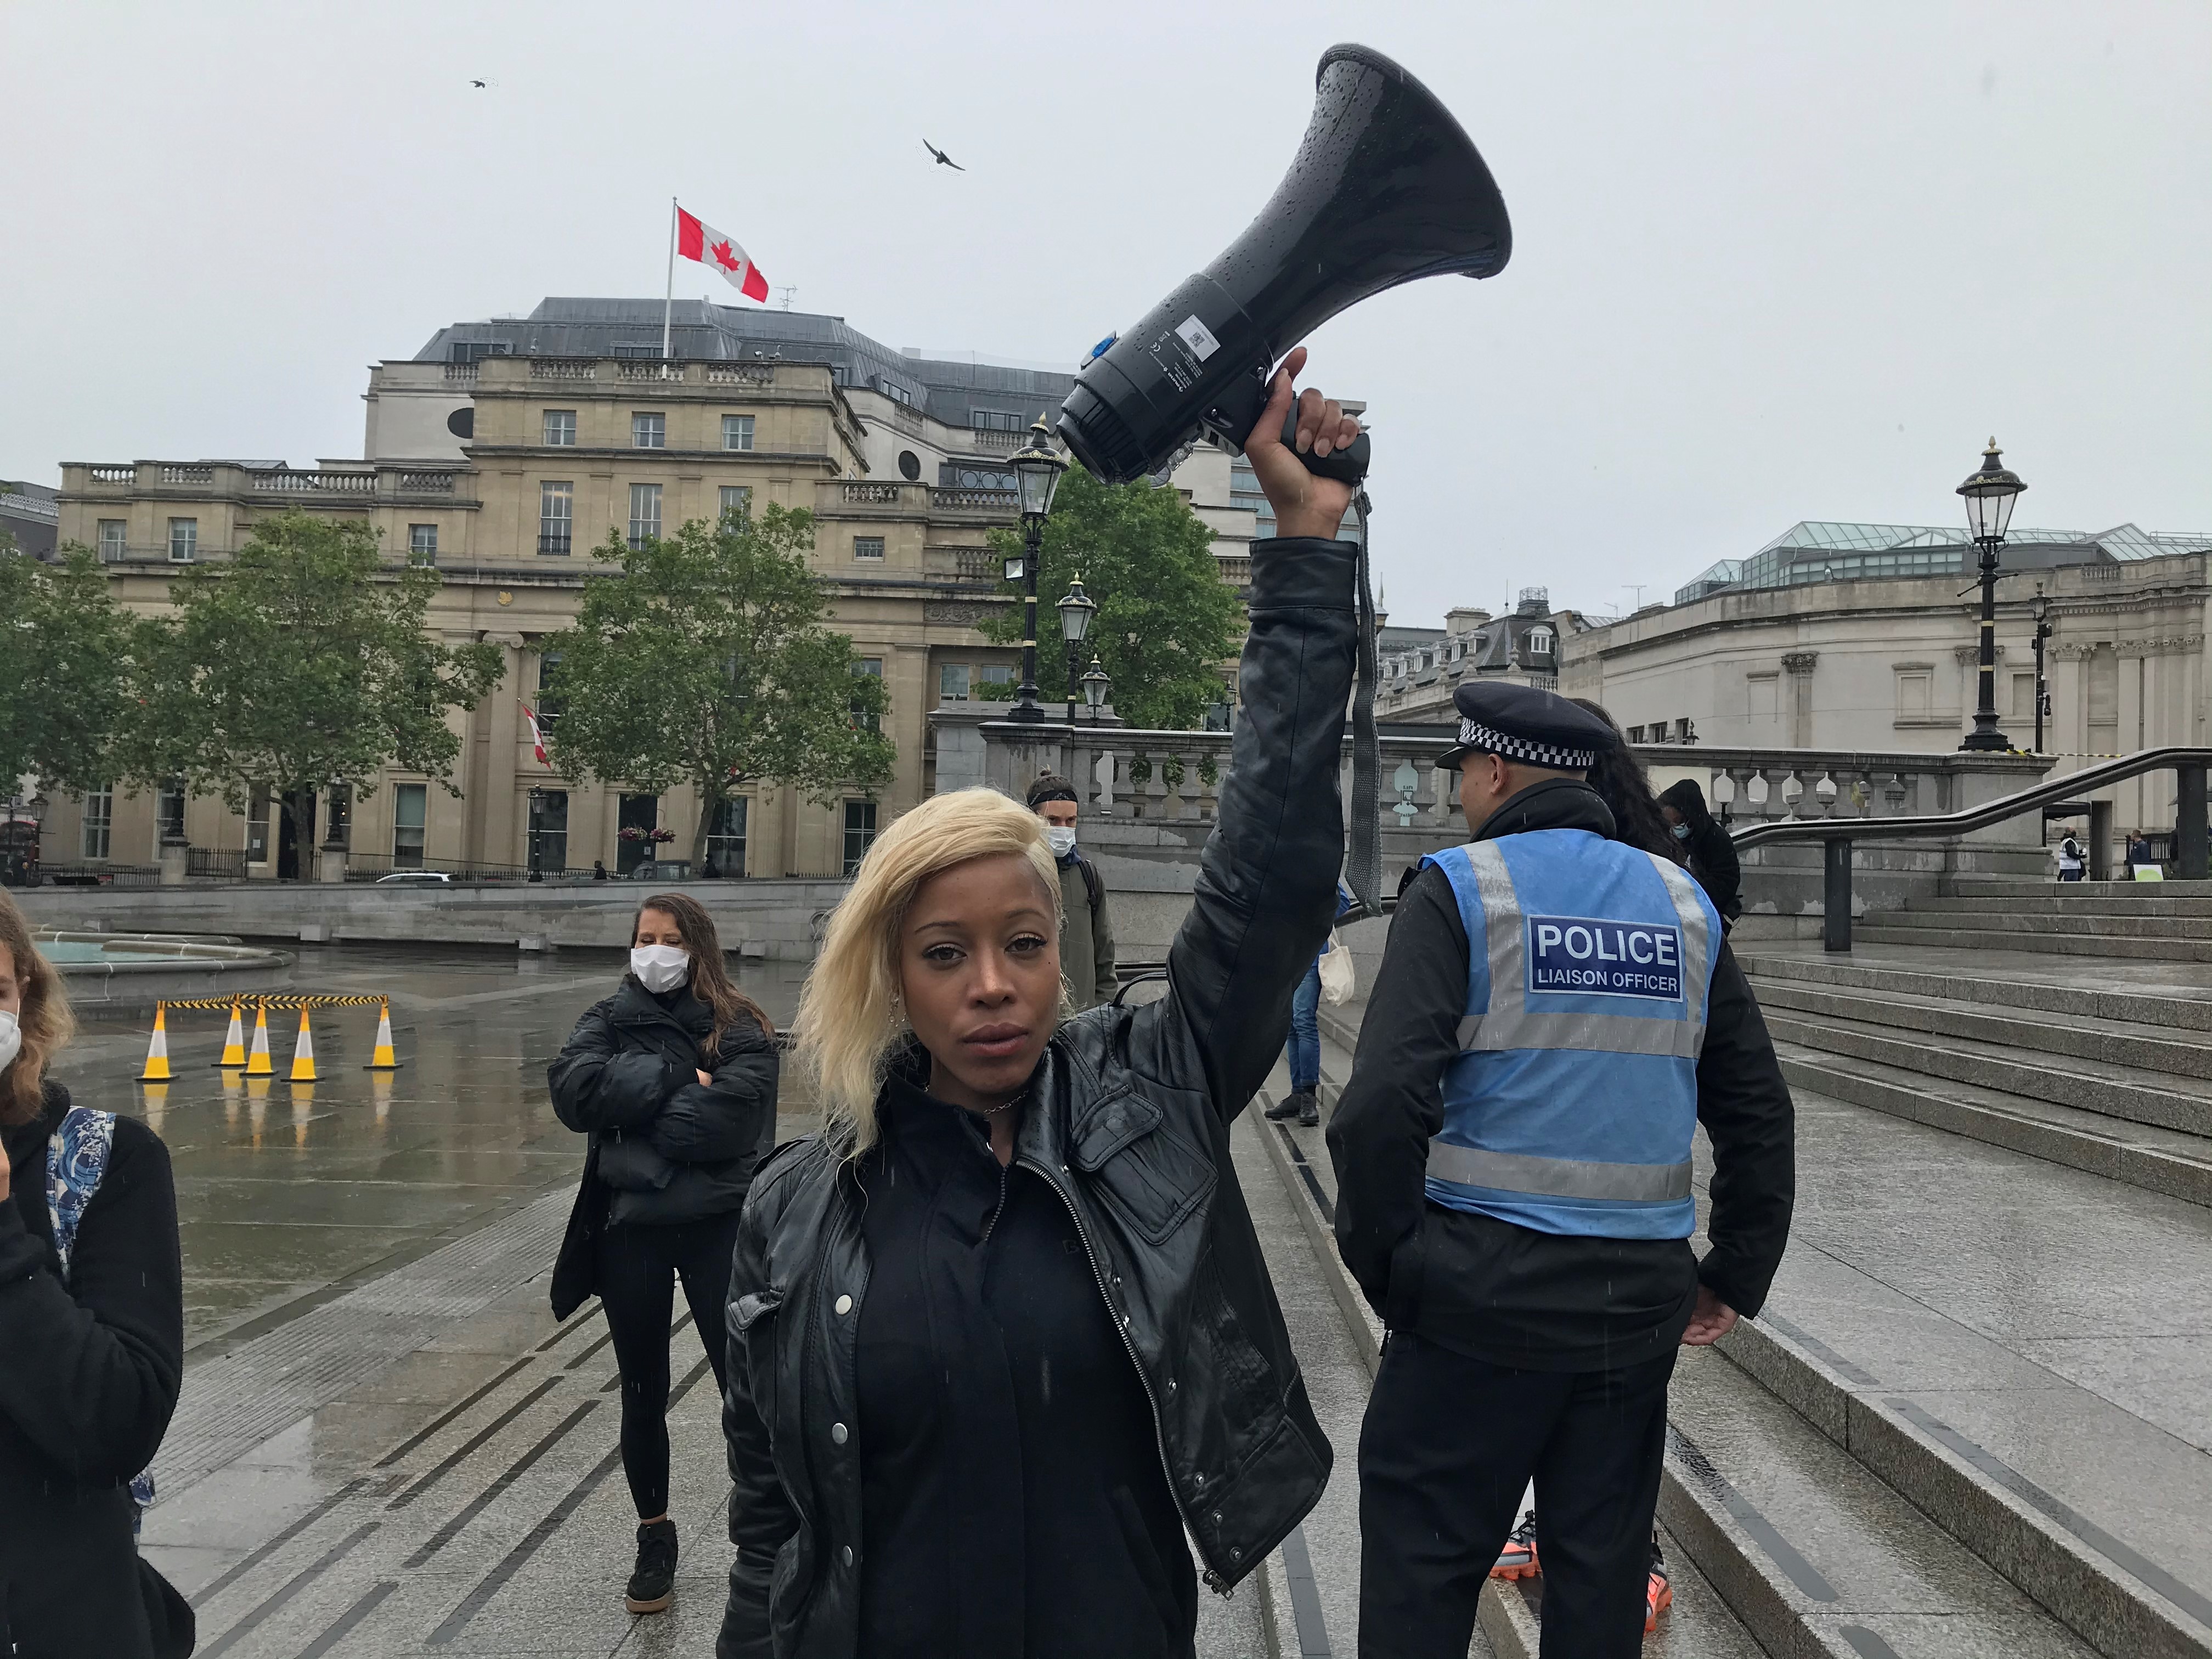 Justice for Black Lives protester Imarn Ayton, 29, urging supporters to protest peacefully in Trafalgar Square, central London on Wednesday.